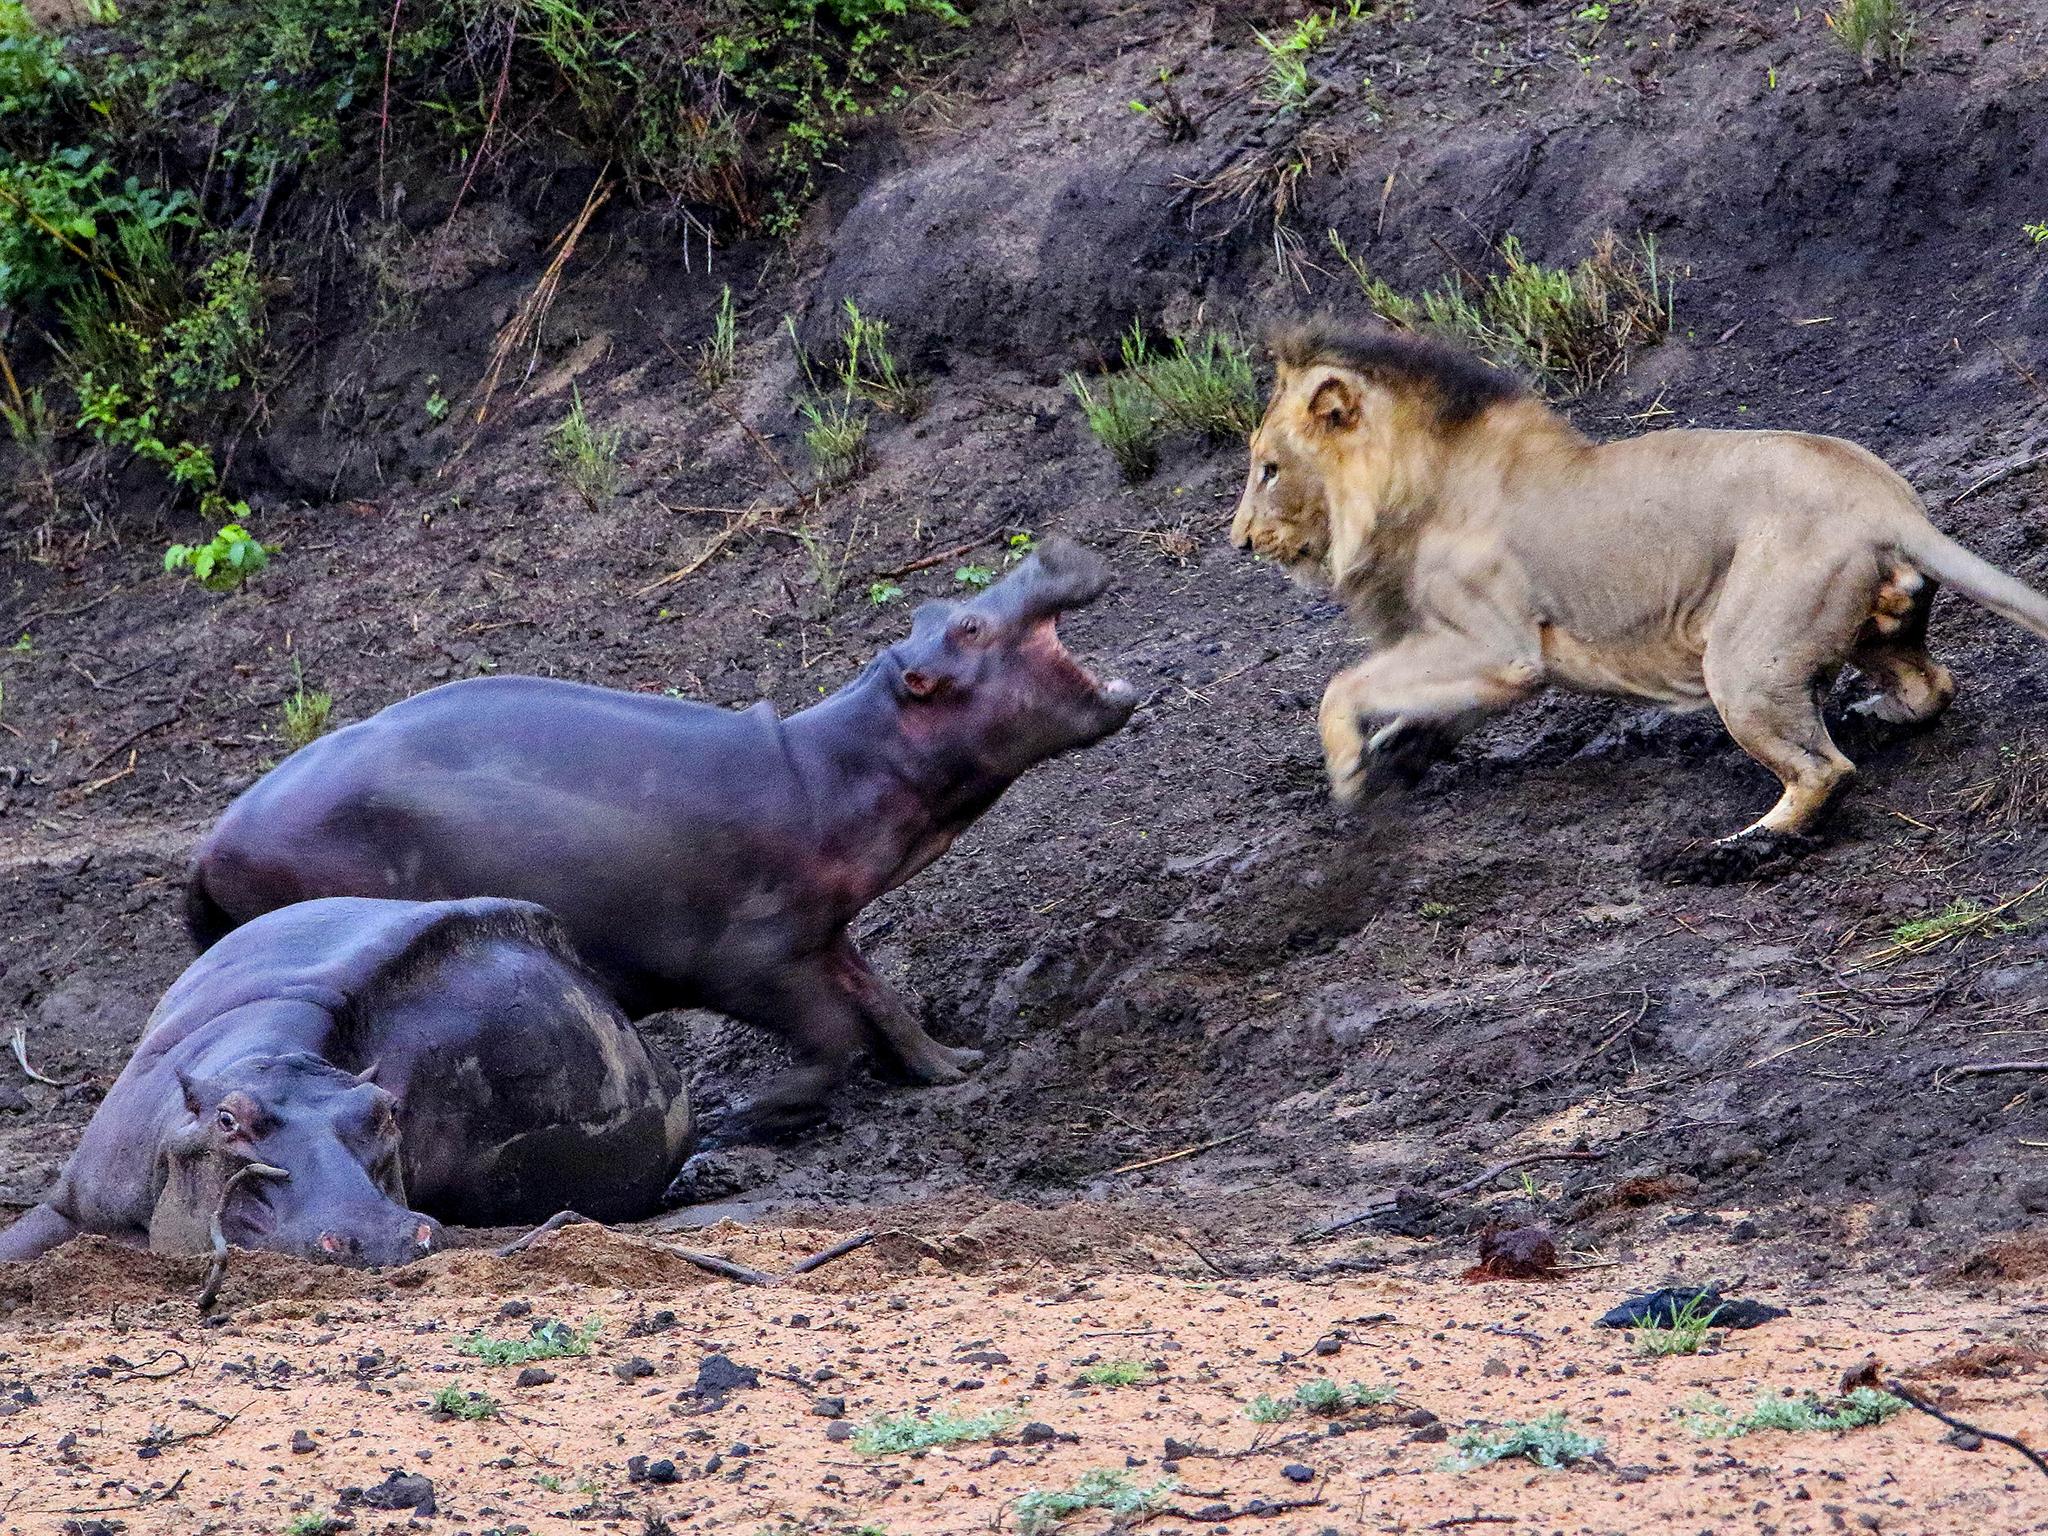 Baby hippo attacks hungry lion in attempt to save mother stuck in muddy quagmire | The Independent | The Independent